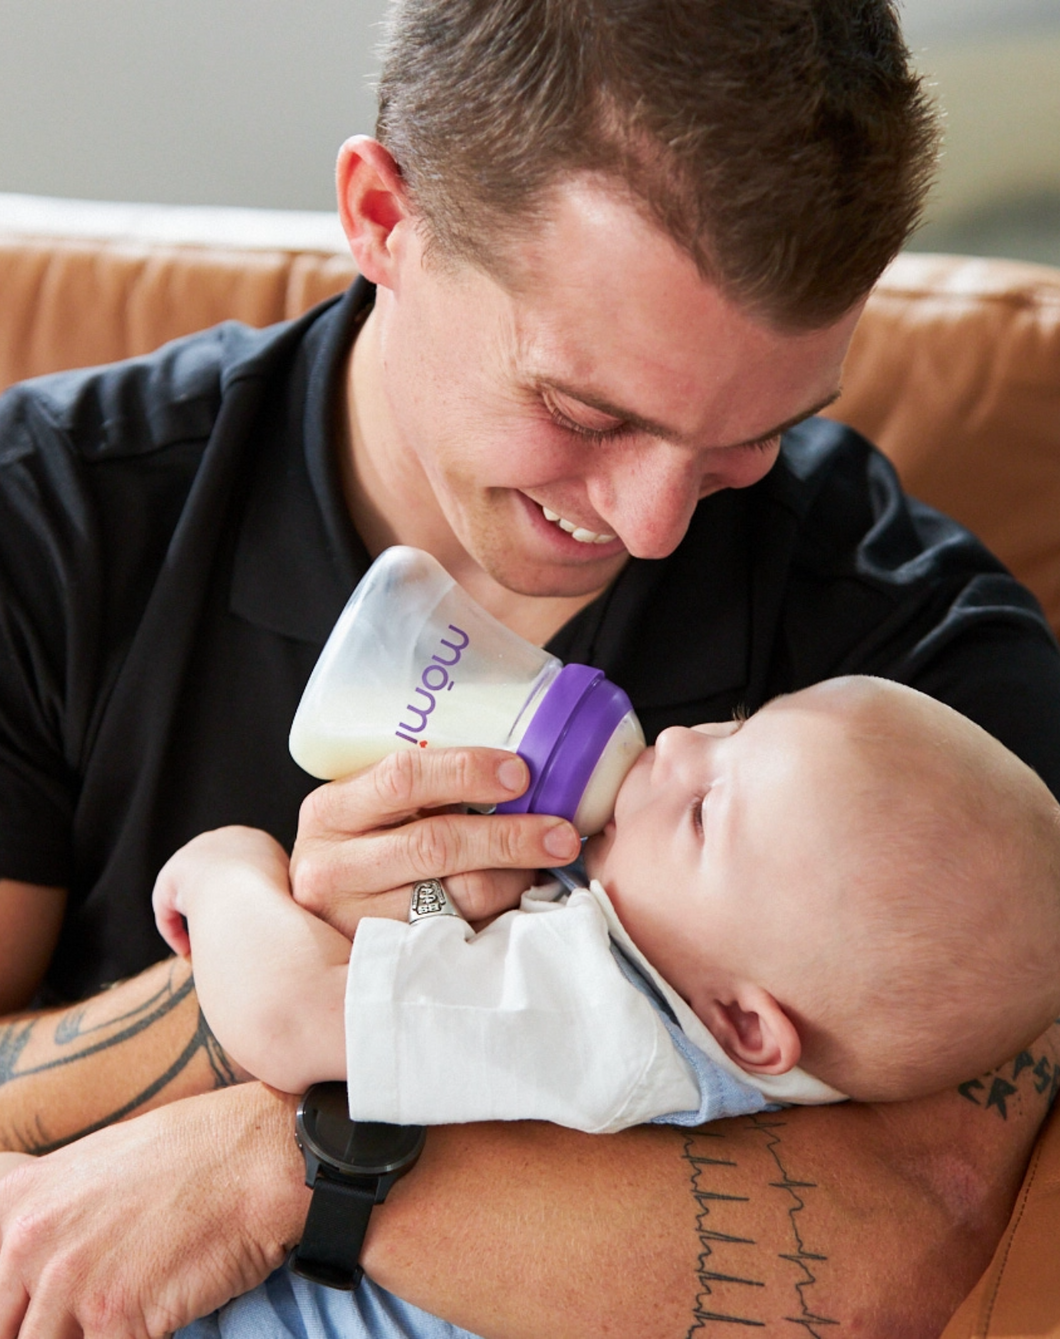 Dad bottle-feeding his baby using the Momi bottle